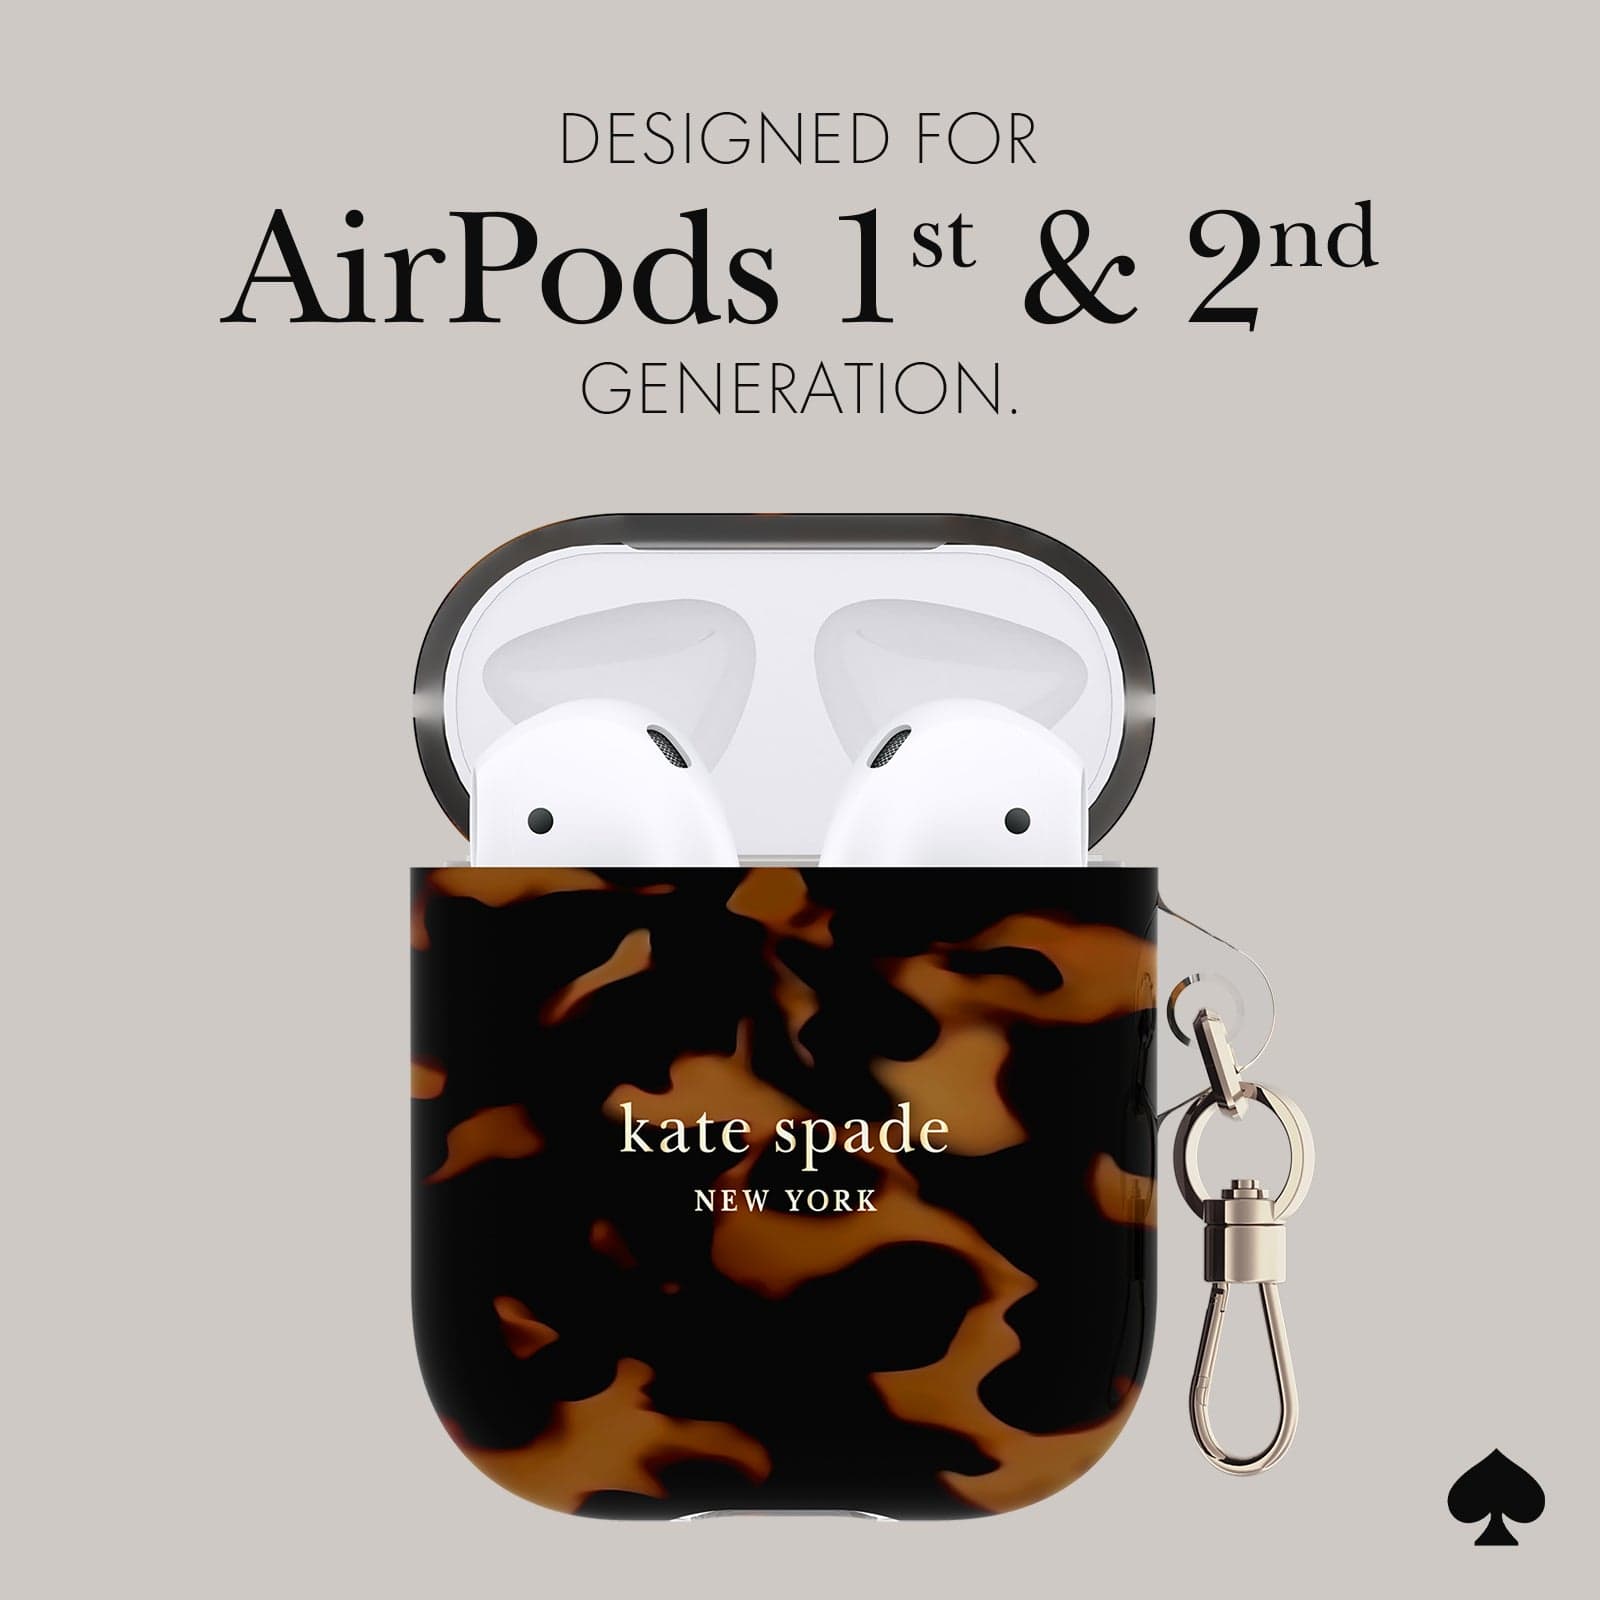 DESIGNED FOR AIRPODS 1 AND 2